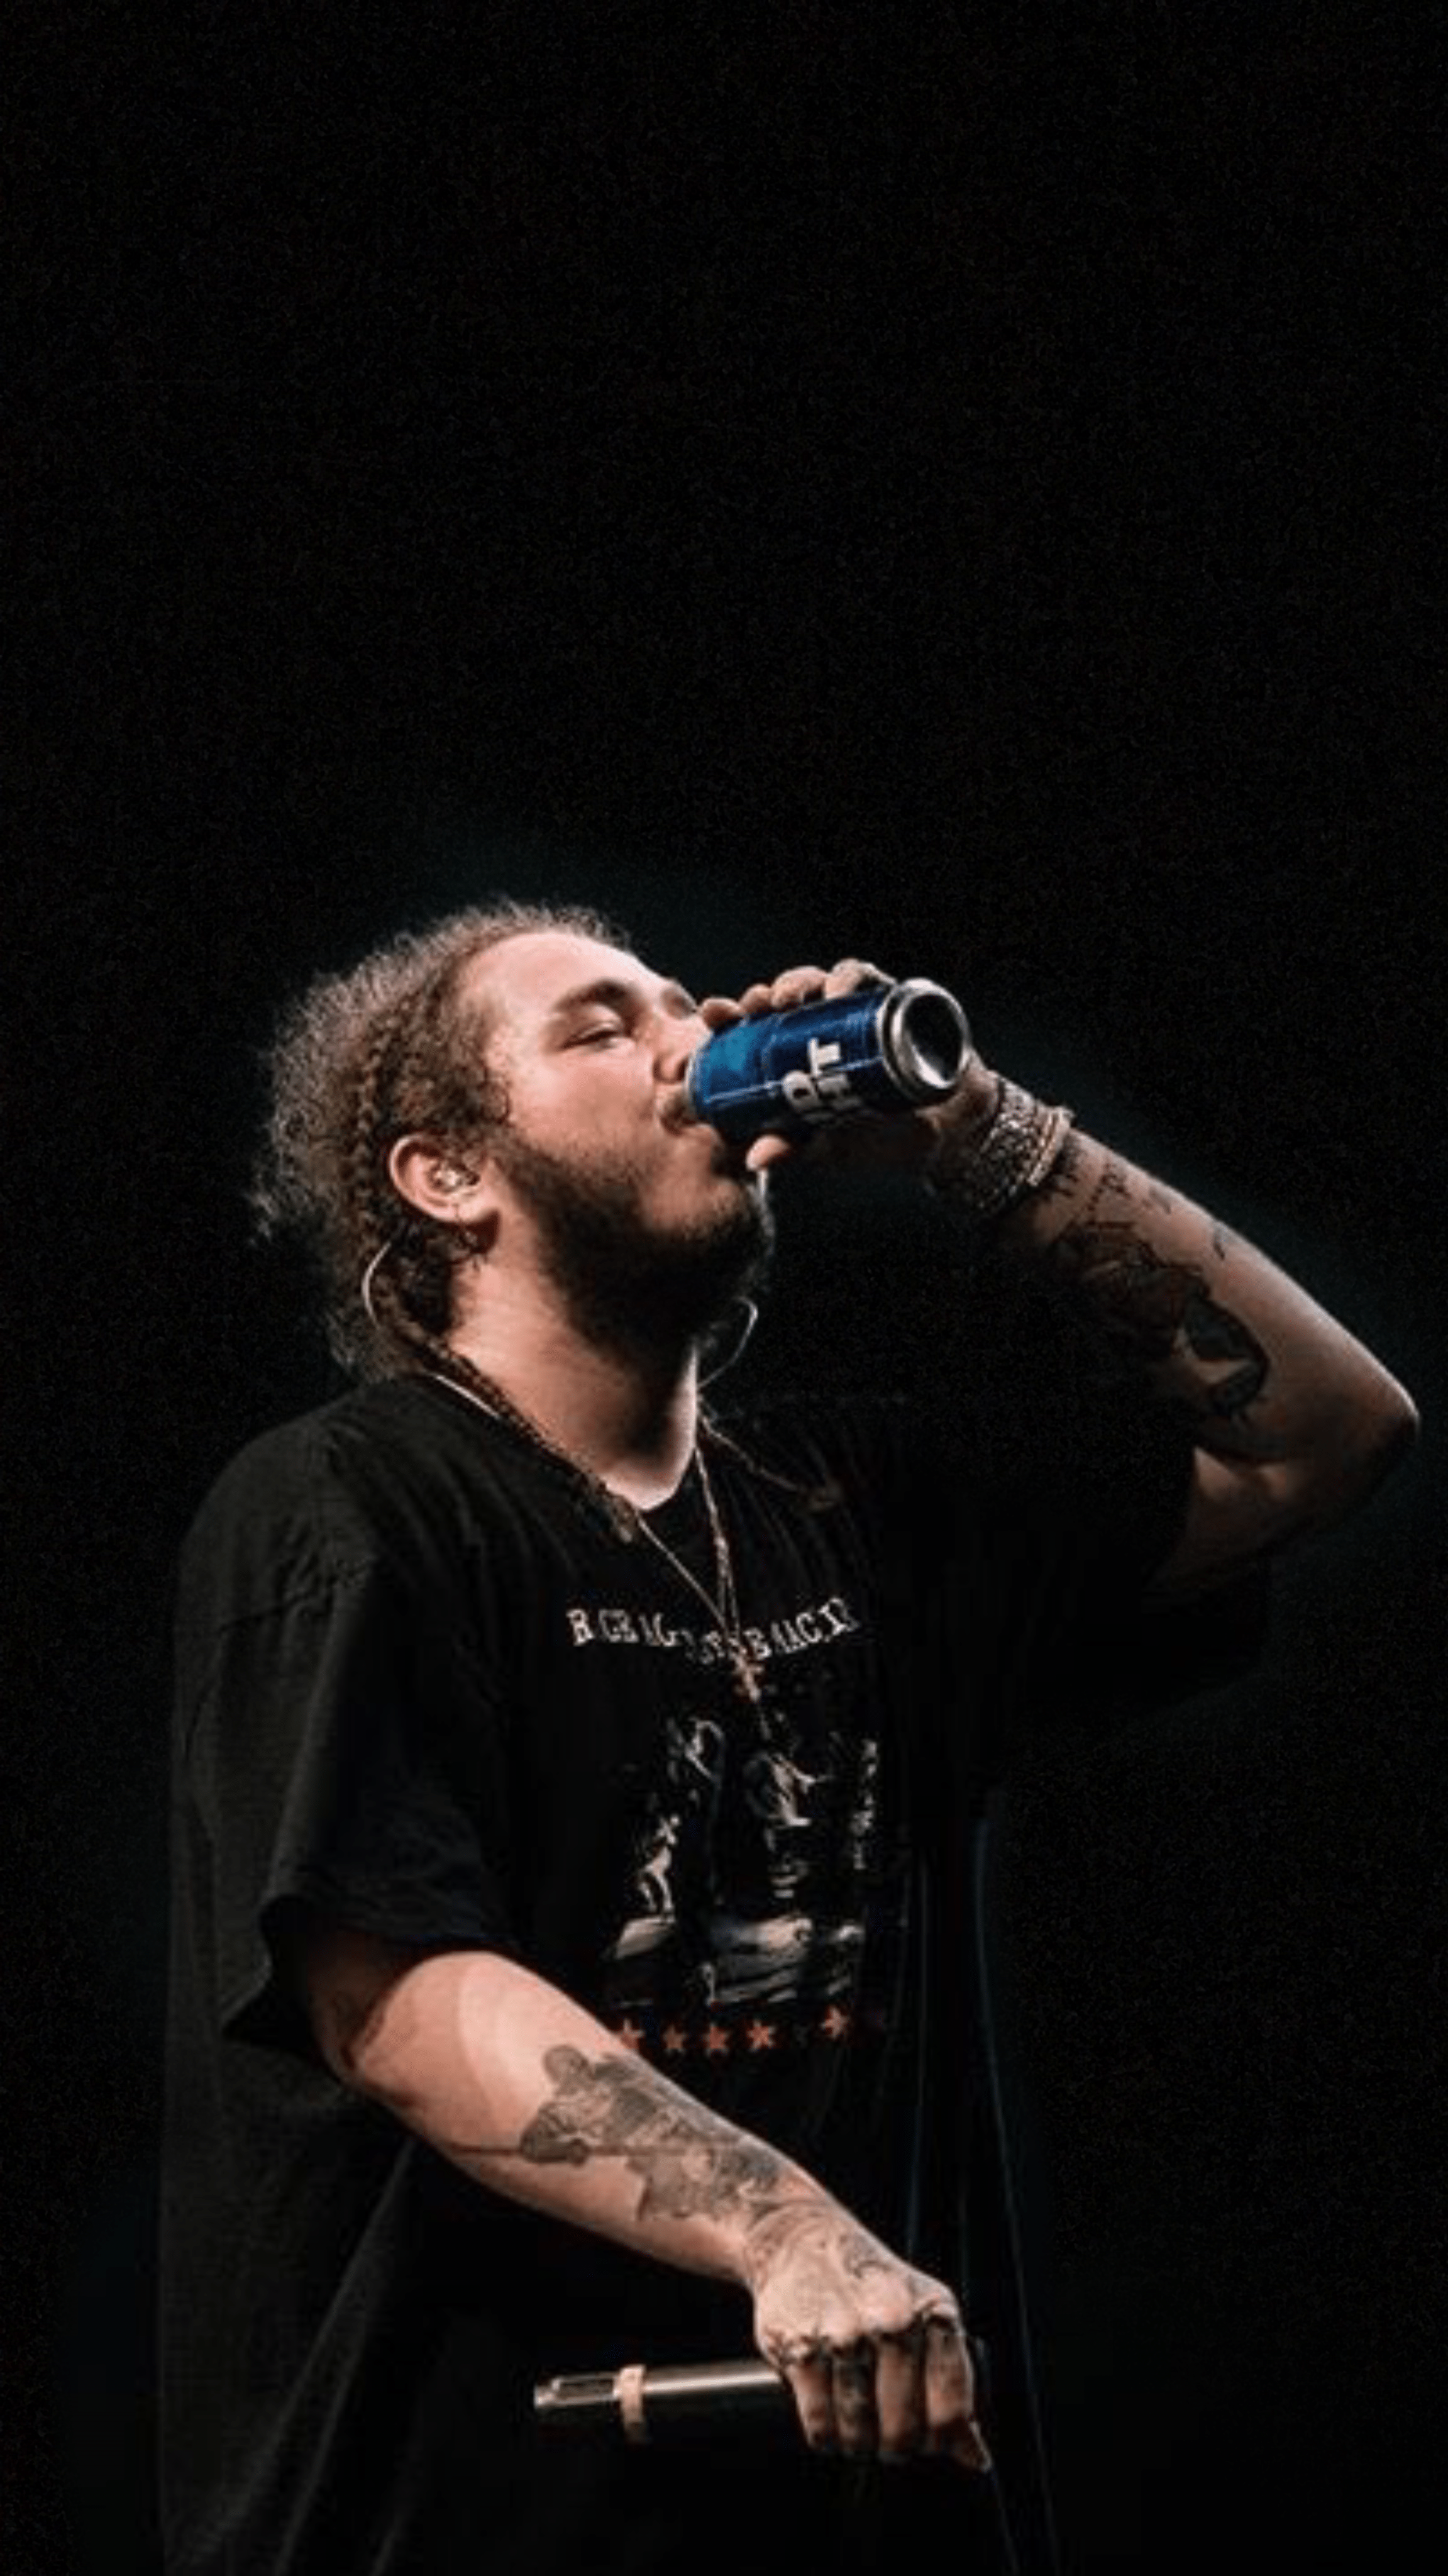 Post Malone Wallpapers  Top 60 Best Post Malone Wallpapers  HQ 